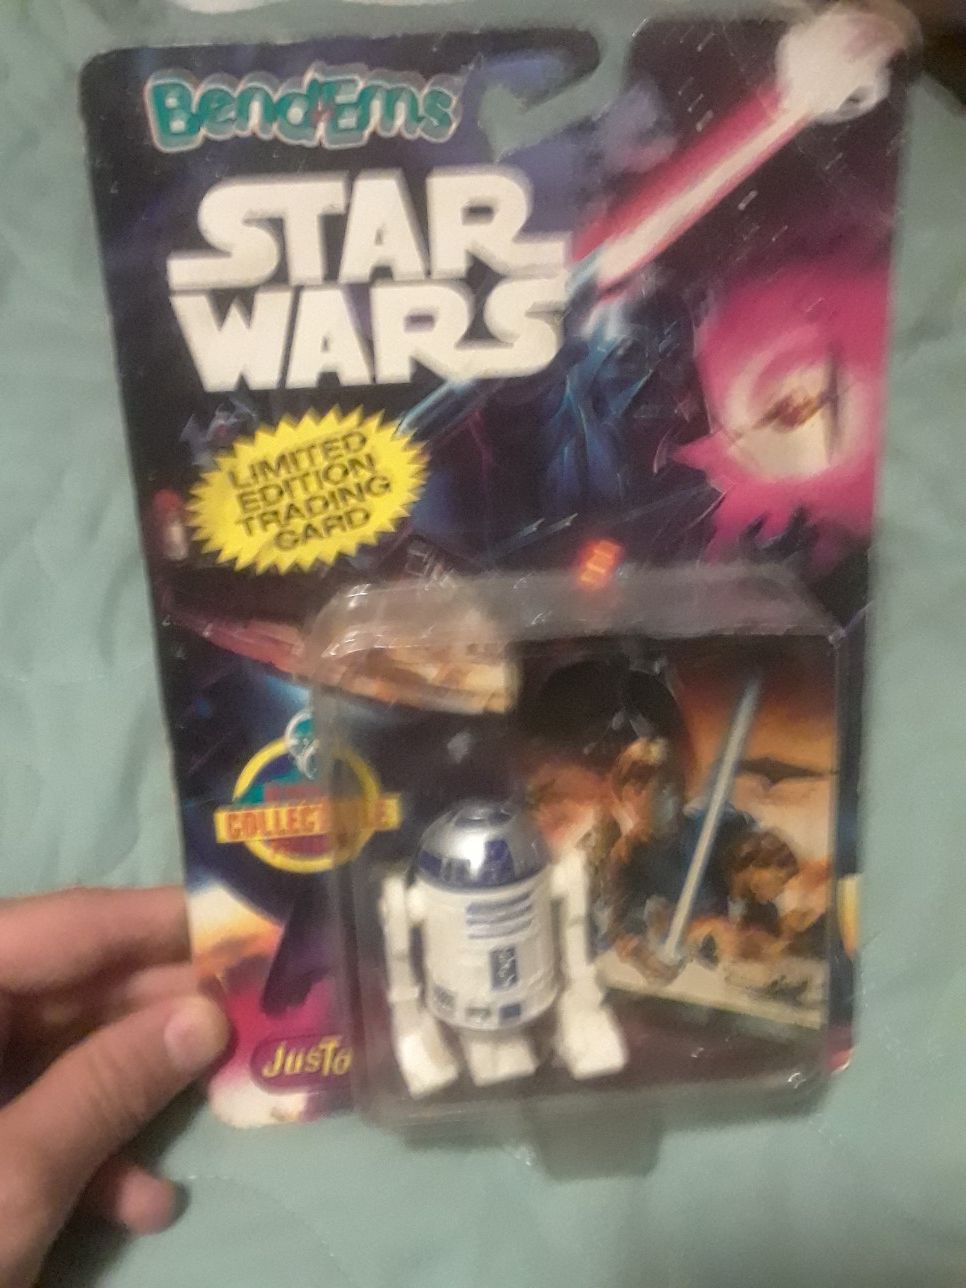 Star wars R2-D2 action figure. New in box